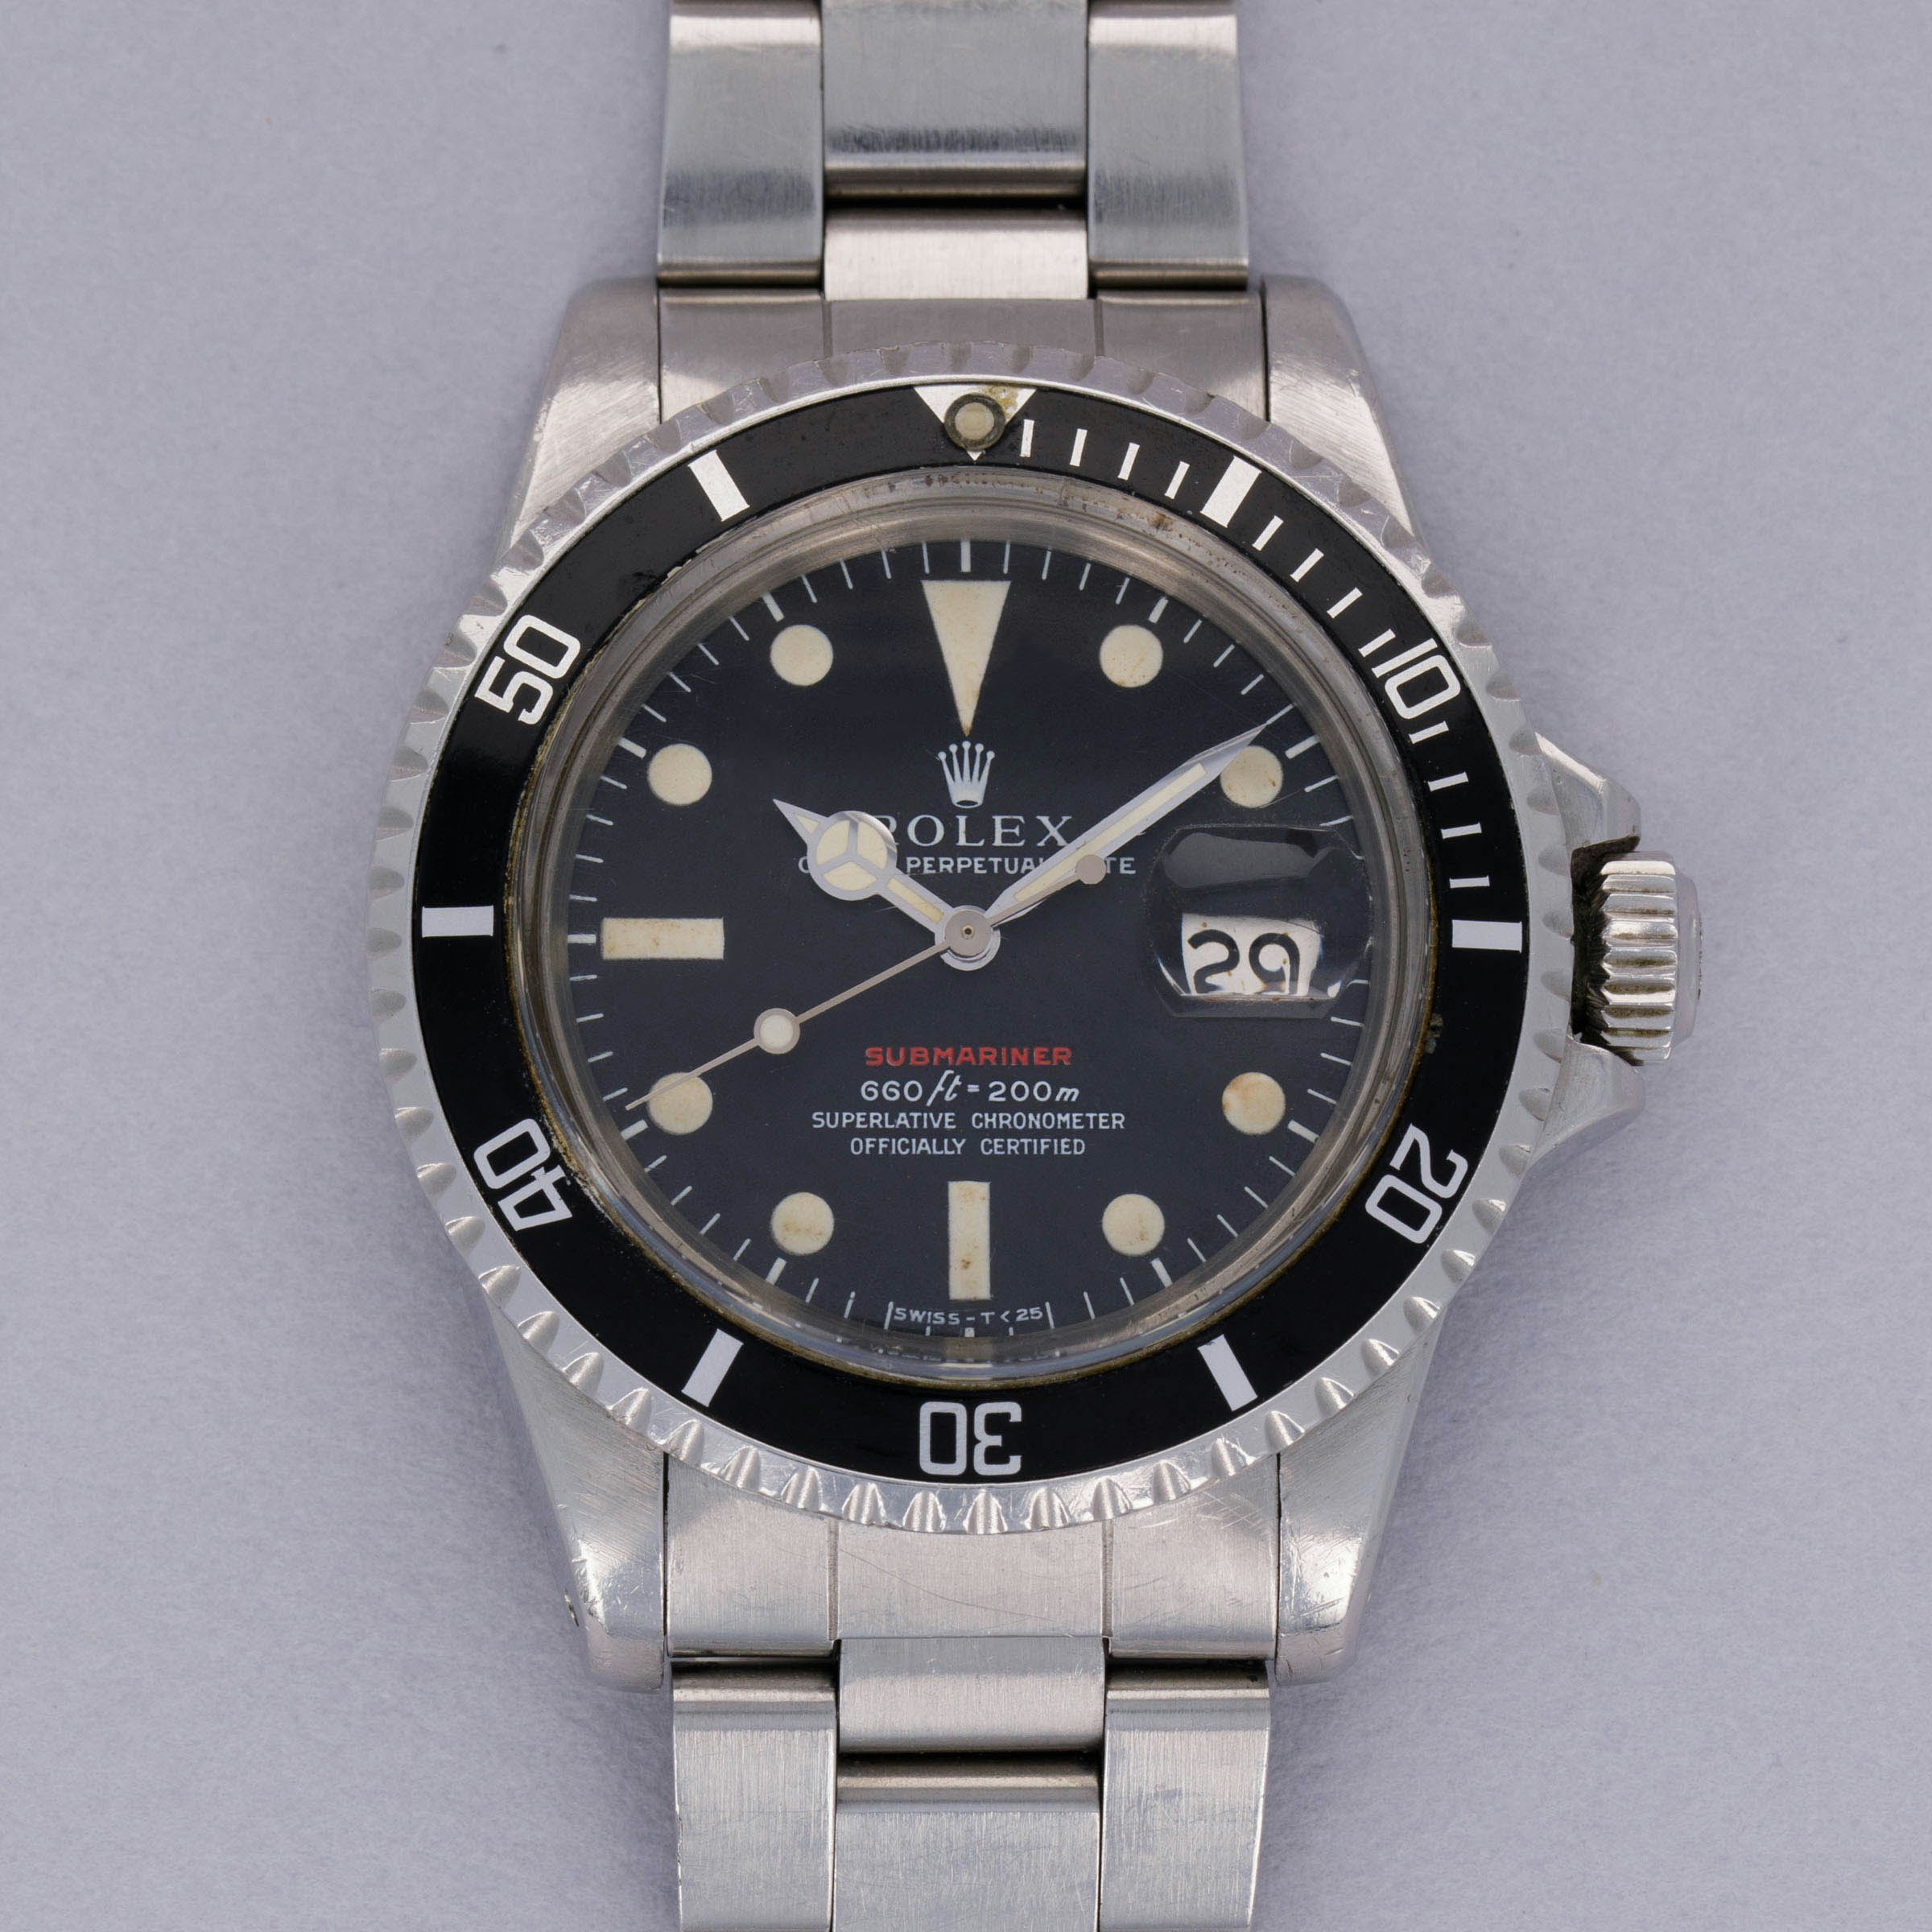 Thumbnail for Rolex Submariner 1680 Red Mk IV Dial Box and Papers